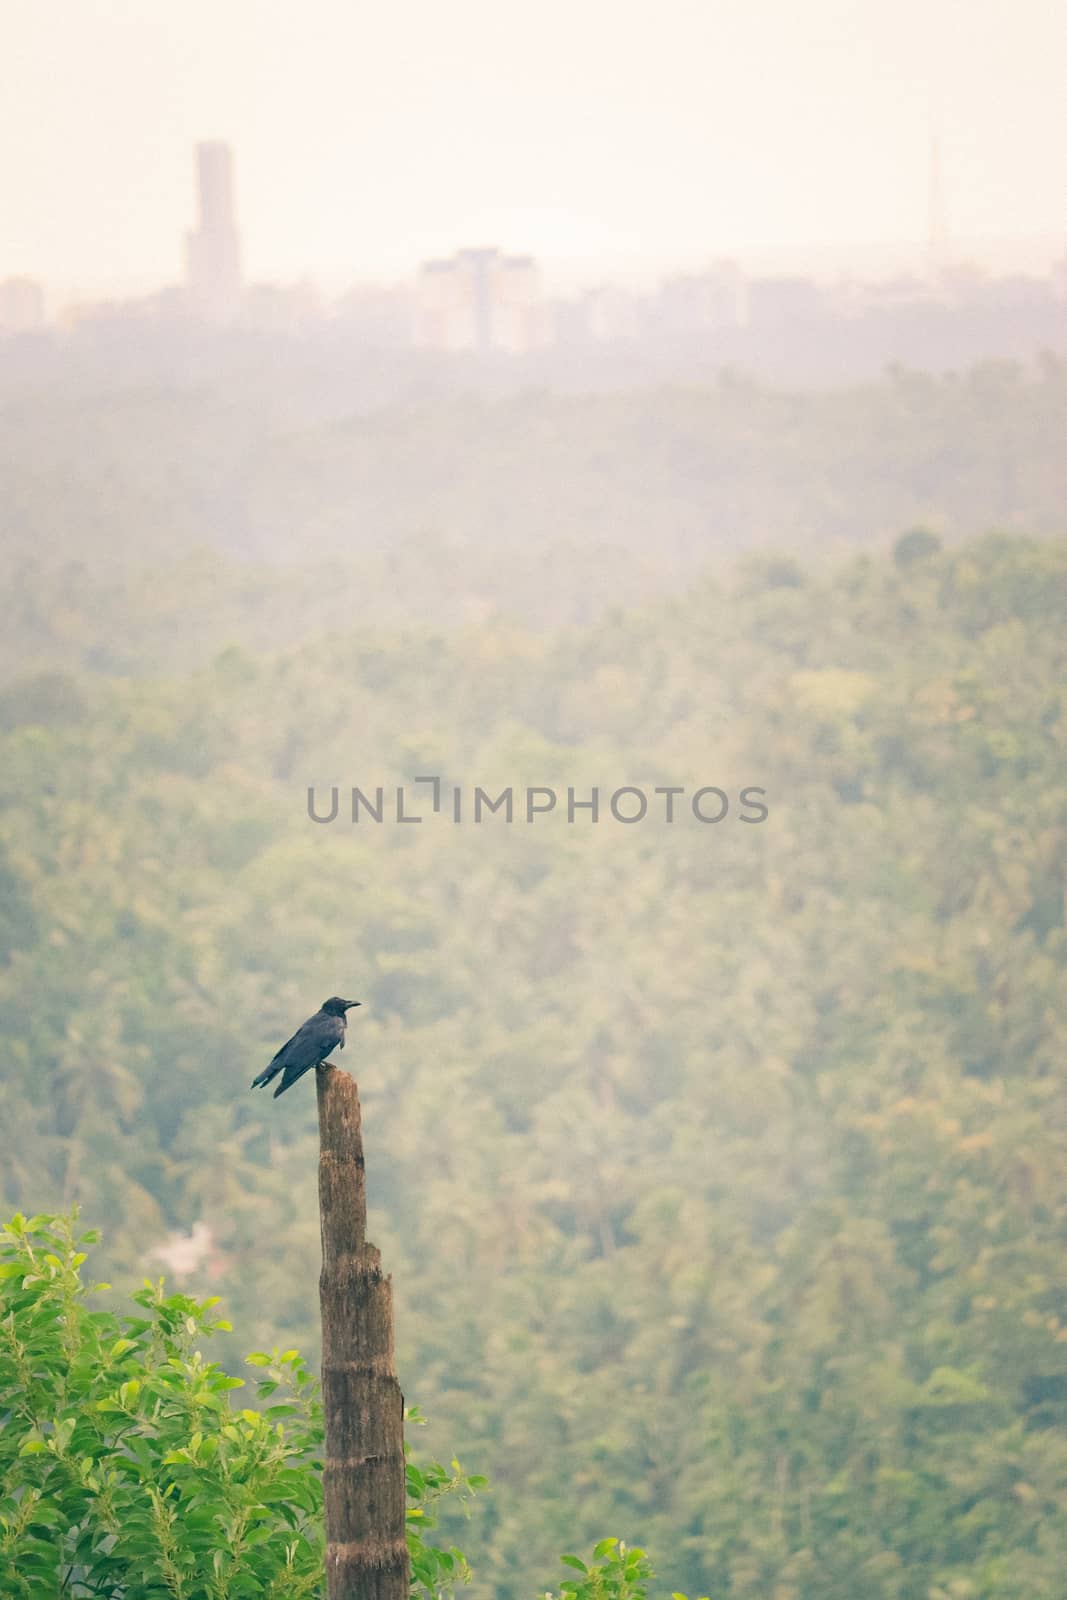 Bird resting in a wooden post by amr_lal